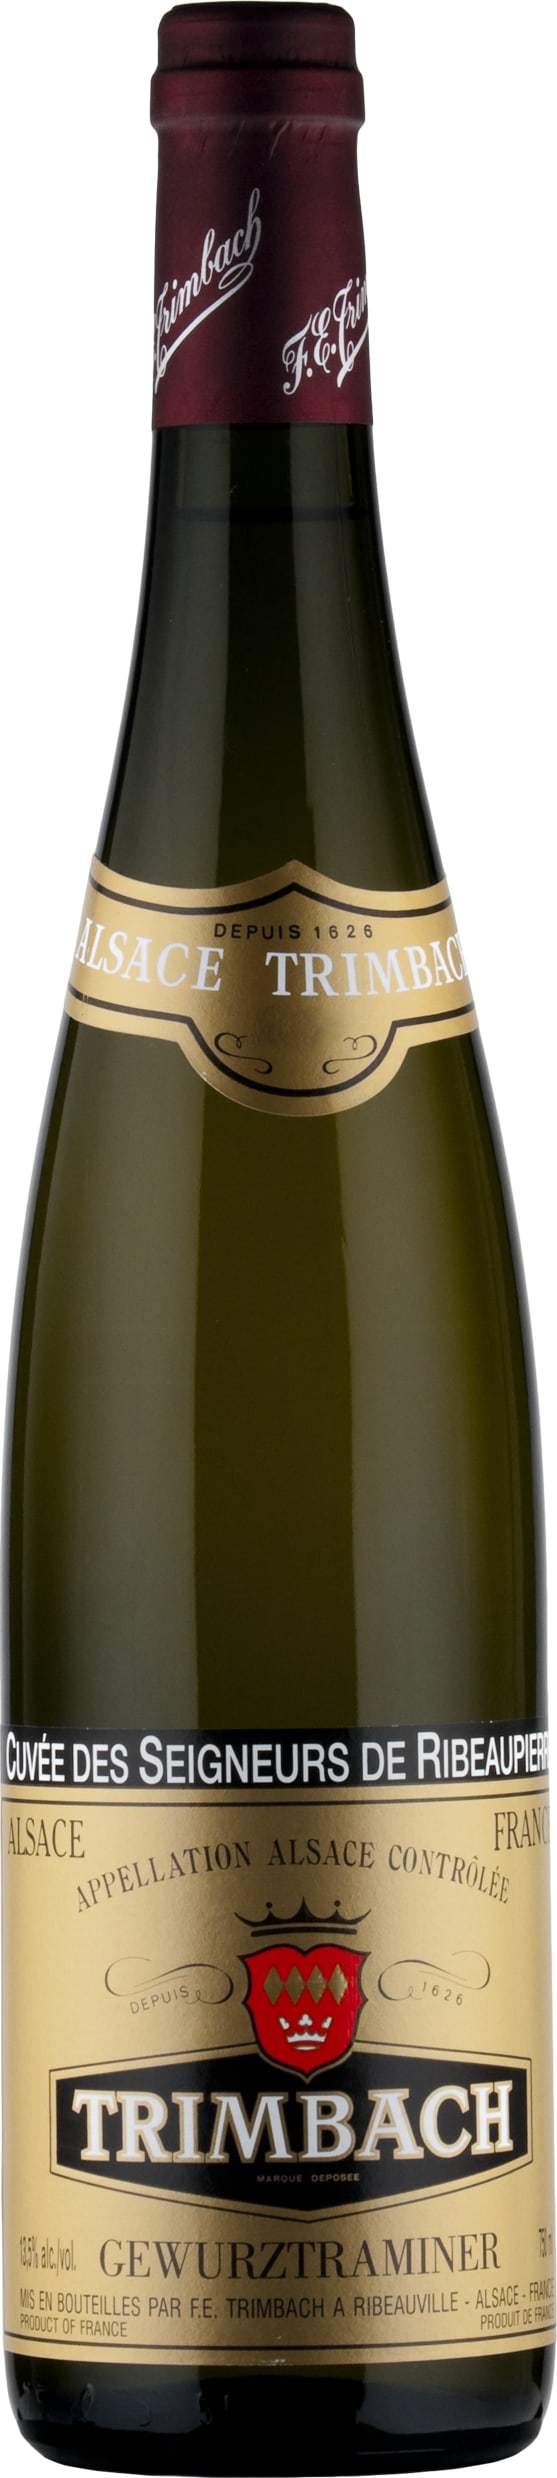 Trimbach Gewurztraminer Cuvee des Seigneurs de Ribeaupierre 2016 75cl - Buy Trimbach Wines from GREAT WINES DIRECT wine shop